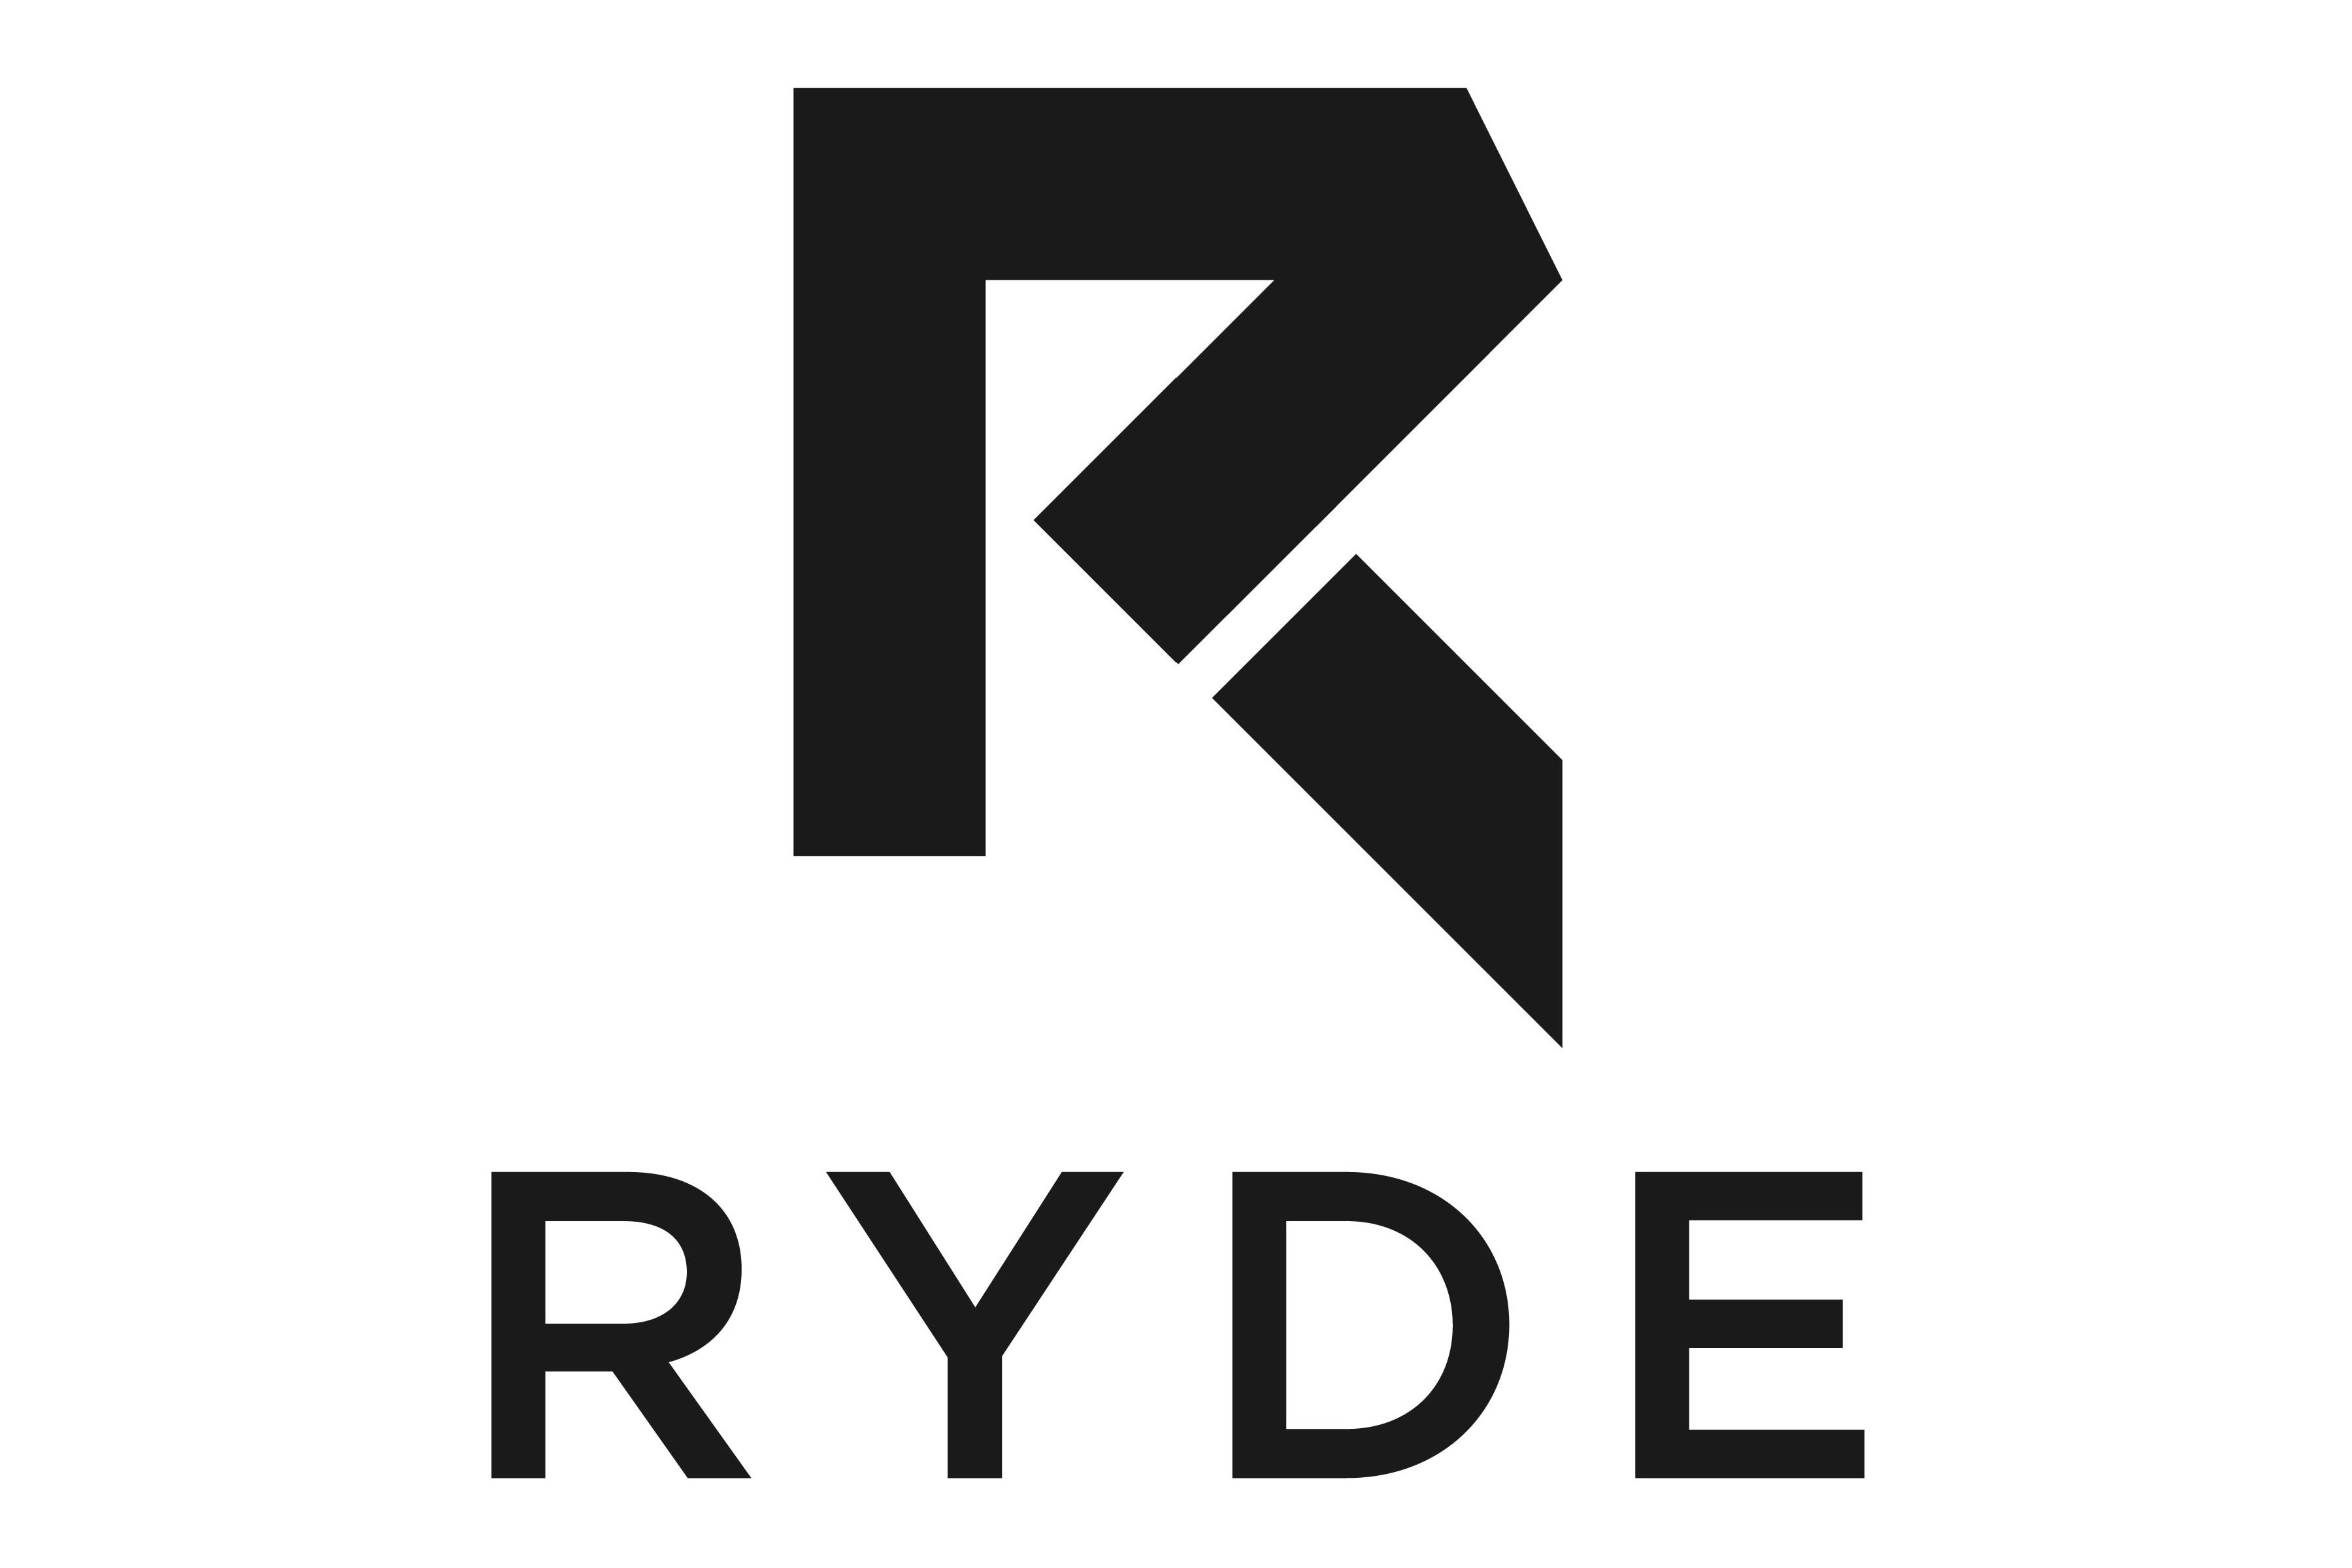 Ryde studios: Read Reviews and Book Classes on ClassPass